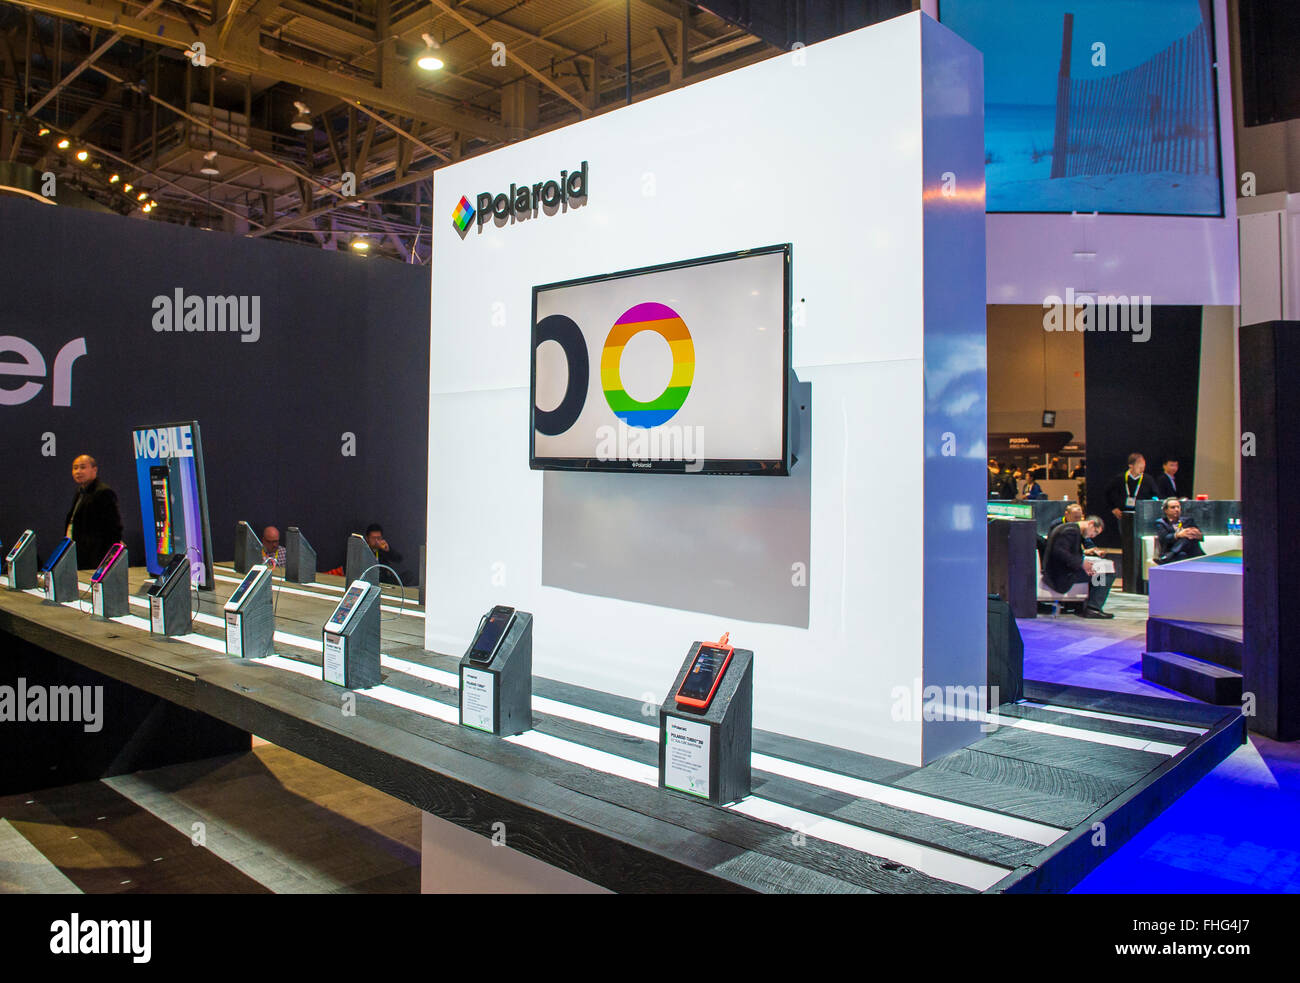 The Polaroid booth at the CES show held in Las Vegas Stock Photo - Alamy